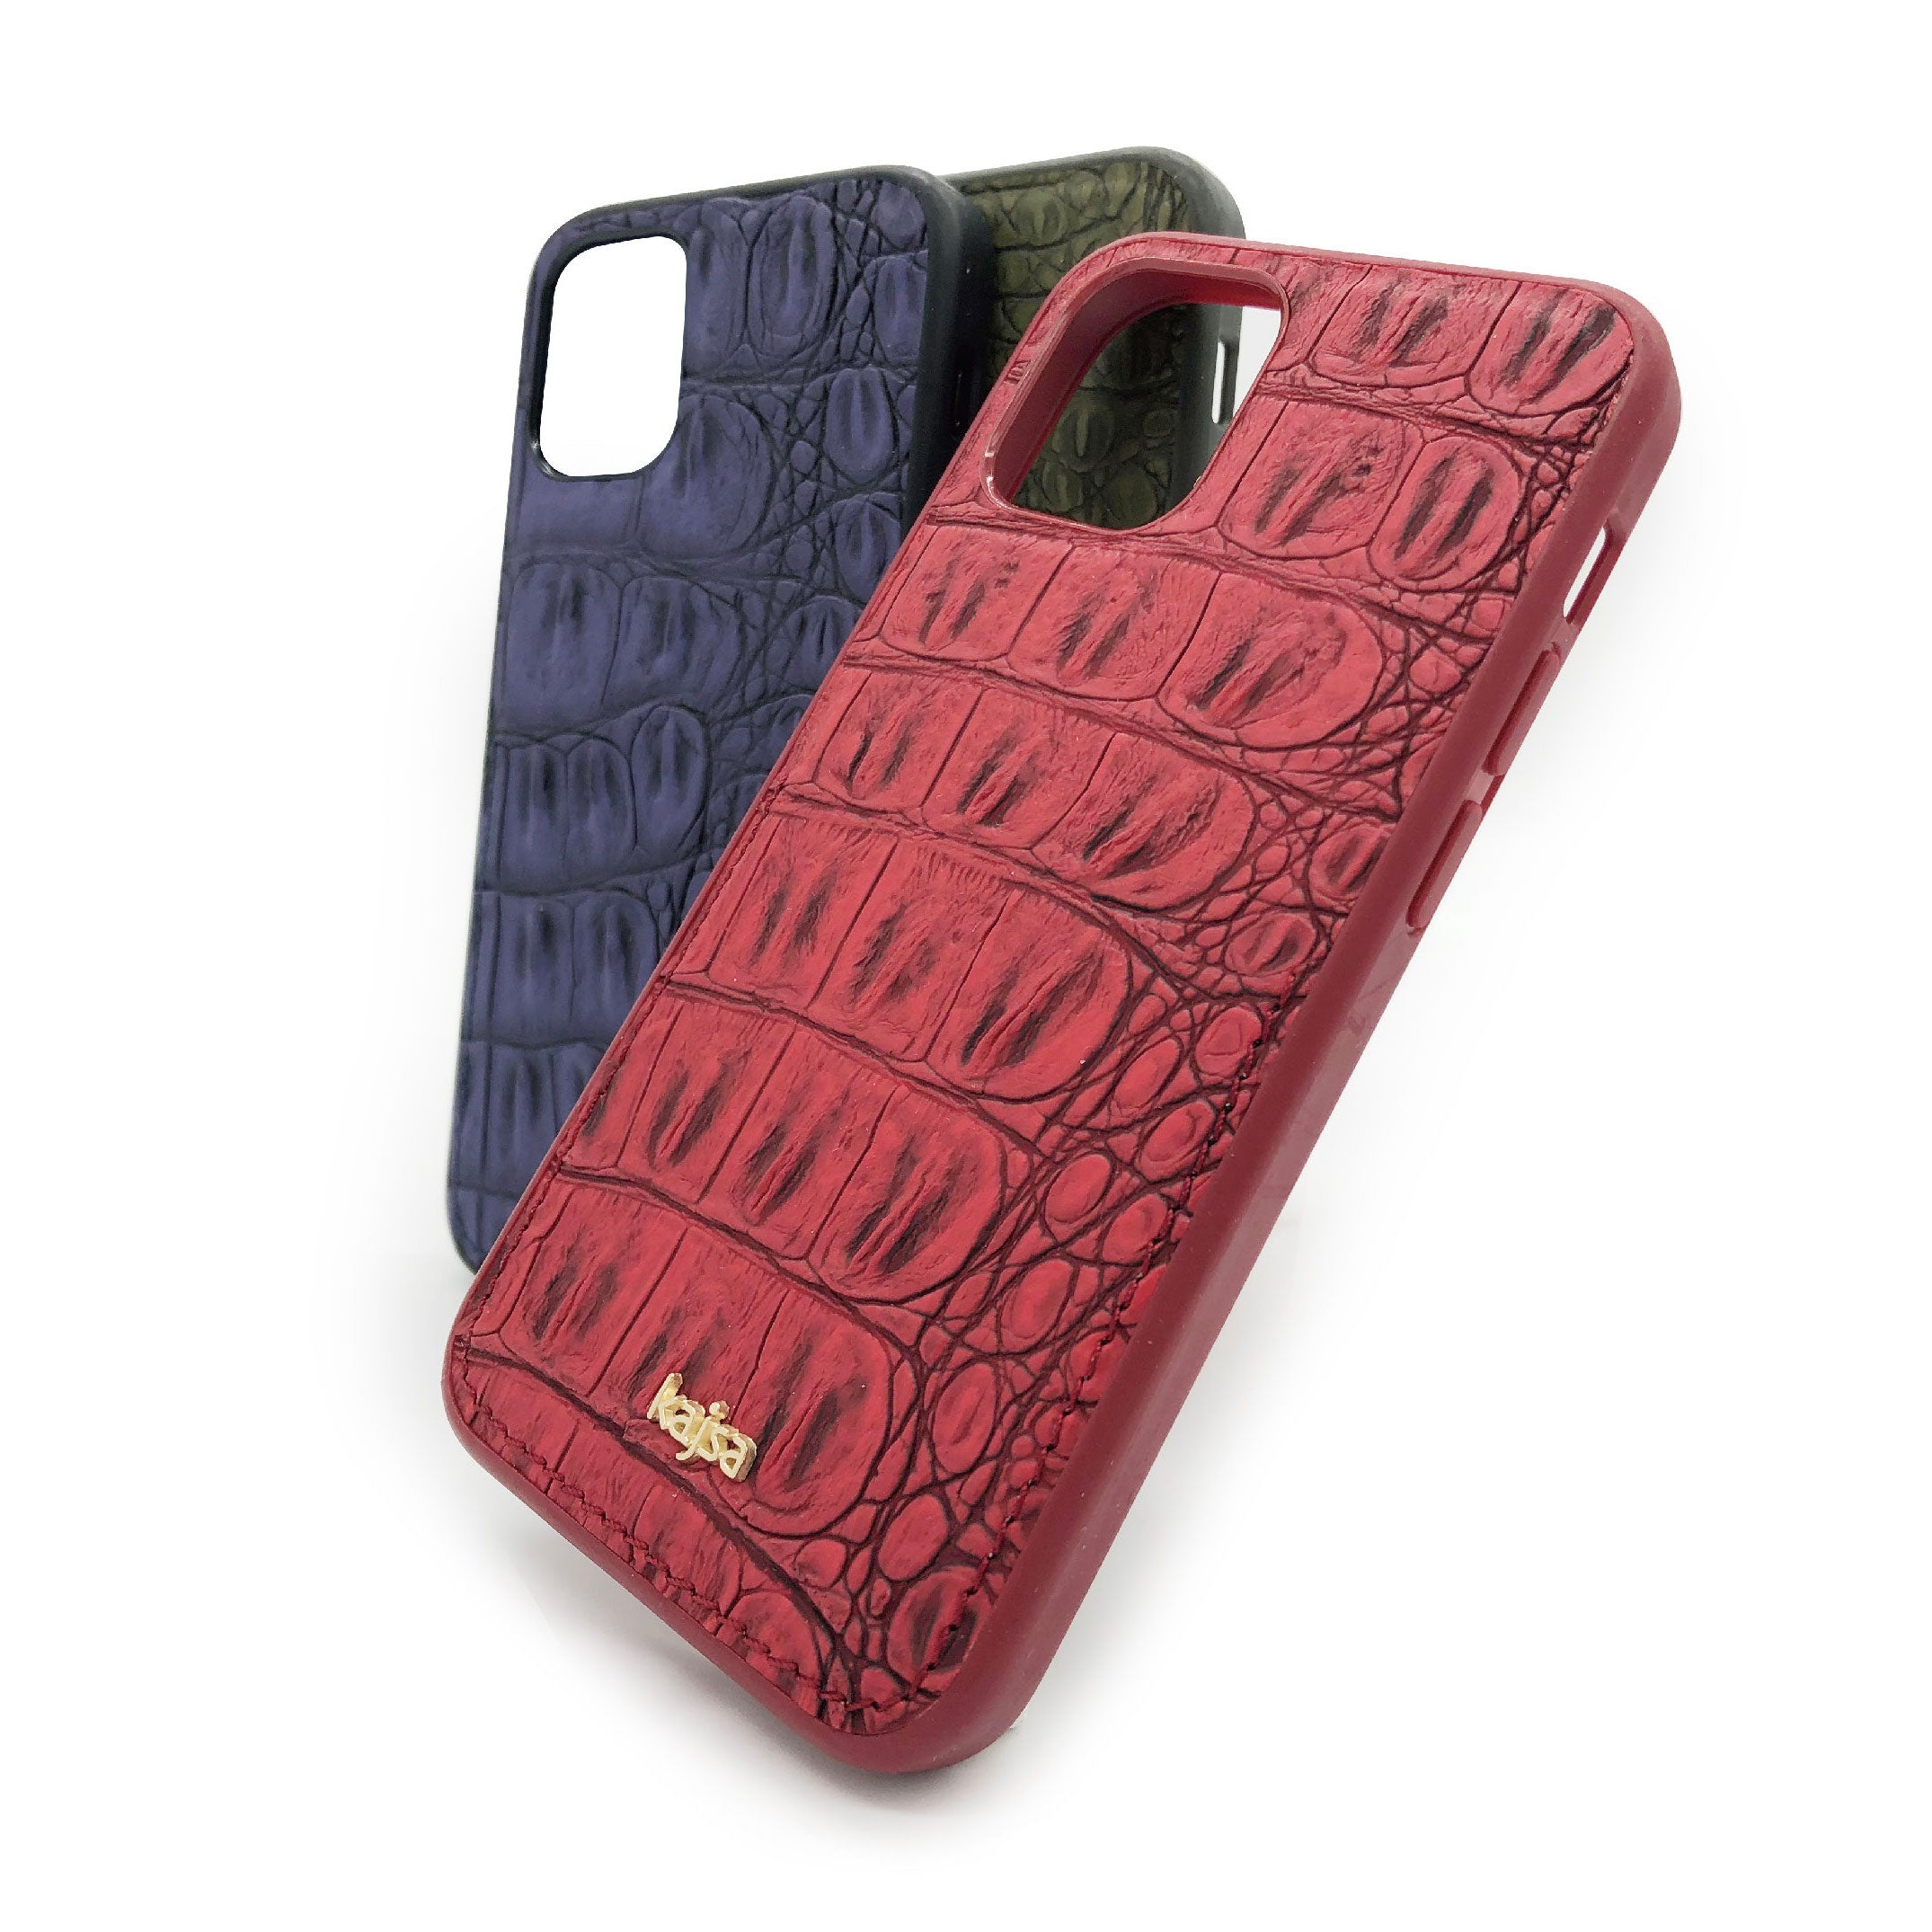 Glamorous Collection - Dirty Croco Back Case for iPhone 12-Phone Case- phone case - phone cases- phone cover- iphone cover- iphone case- iphone cases- leather case- leather cases- DIYCASE - custom case - leather cover - hand strap case - croco pattern case - snake pattern case - carbon fiber phone case - phone case brand - unique phone case - high quality - phone case brand - protective case - buy phone case hong kong - online buy phone case - iphone‎手機殼 - 客製化手機殼 - samsung ‎手機殼 - 香港手機殼 - 買電話殼